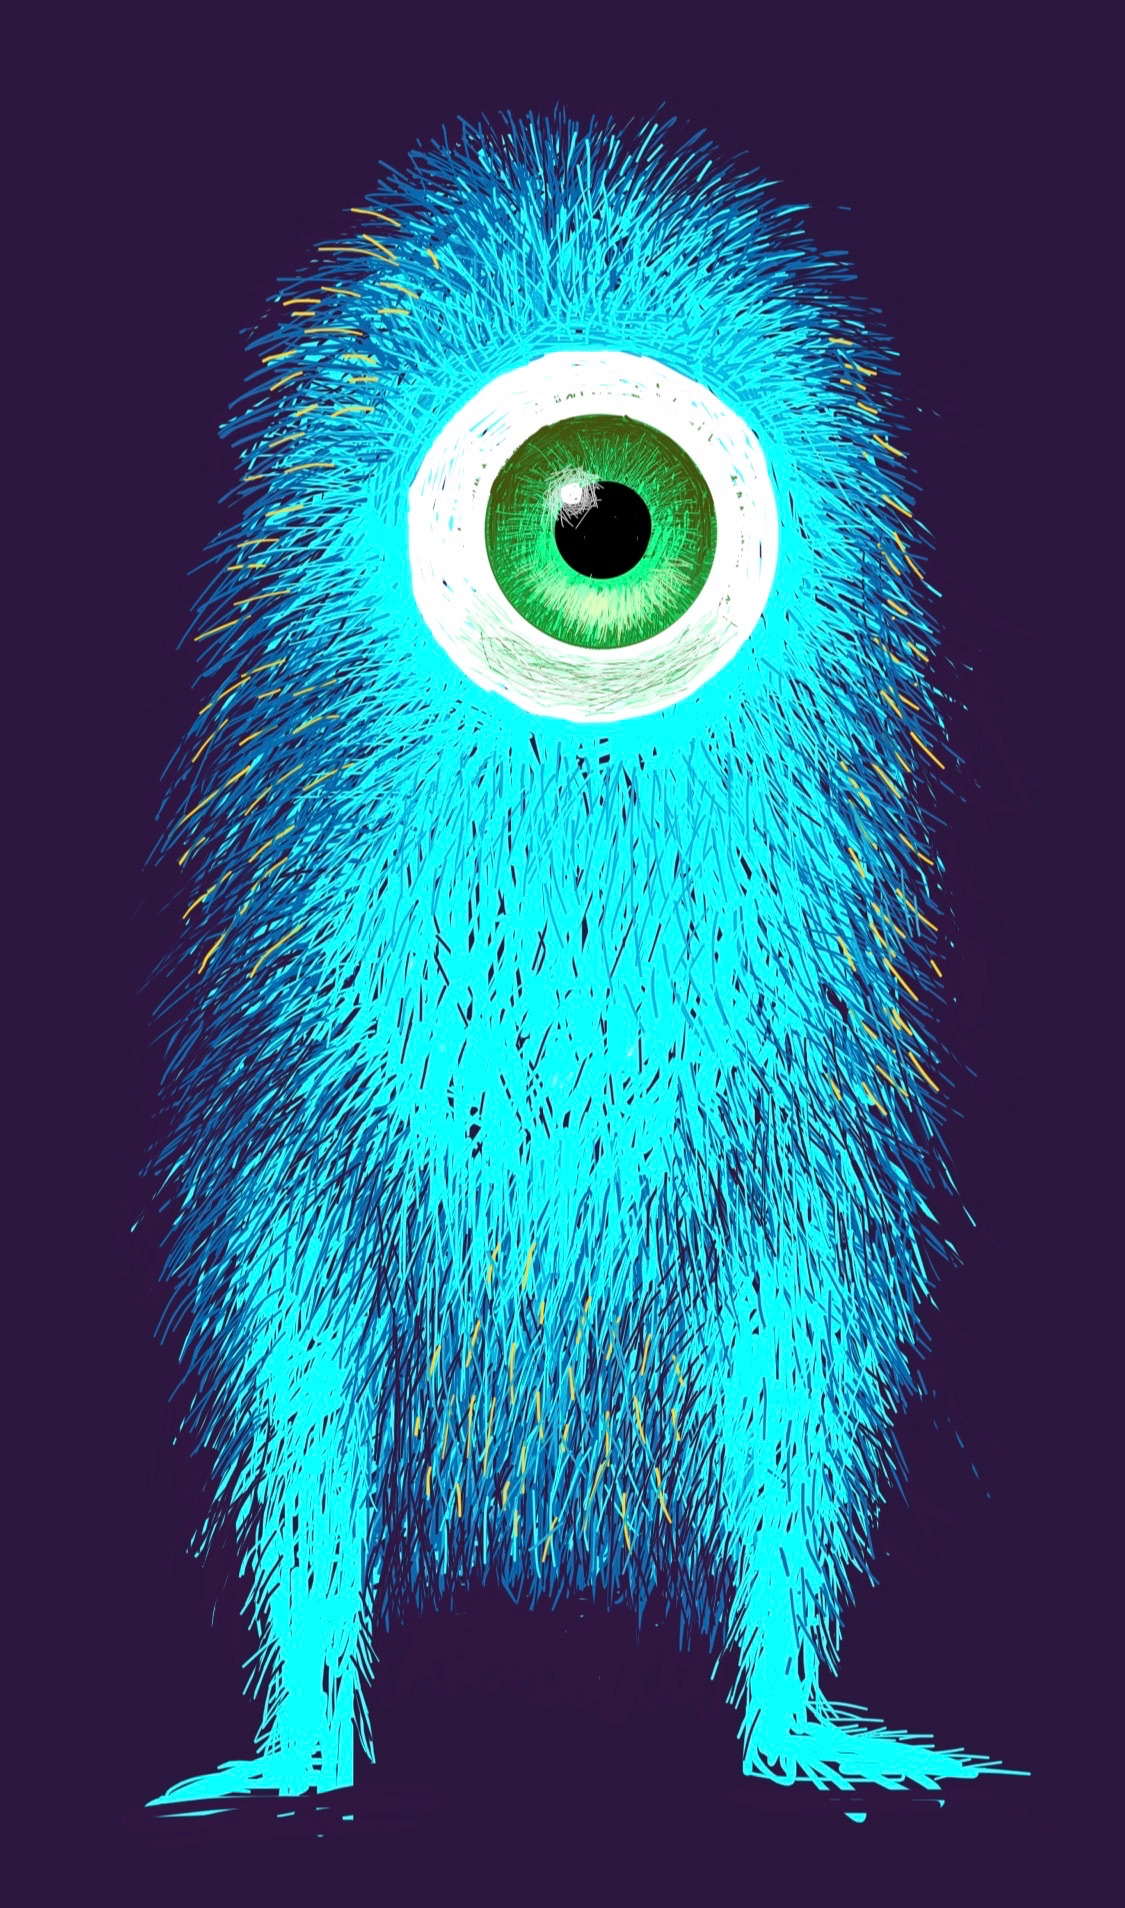 A blue furry monster with one eye